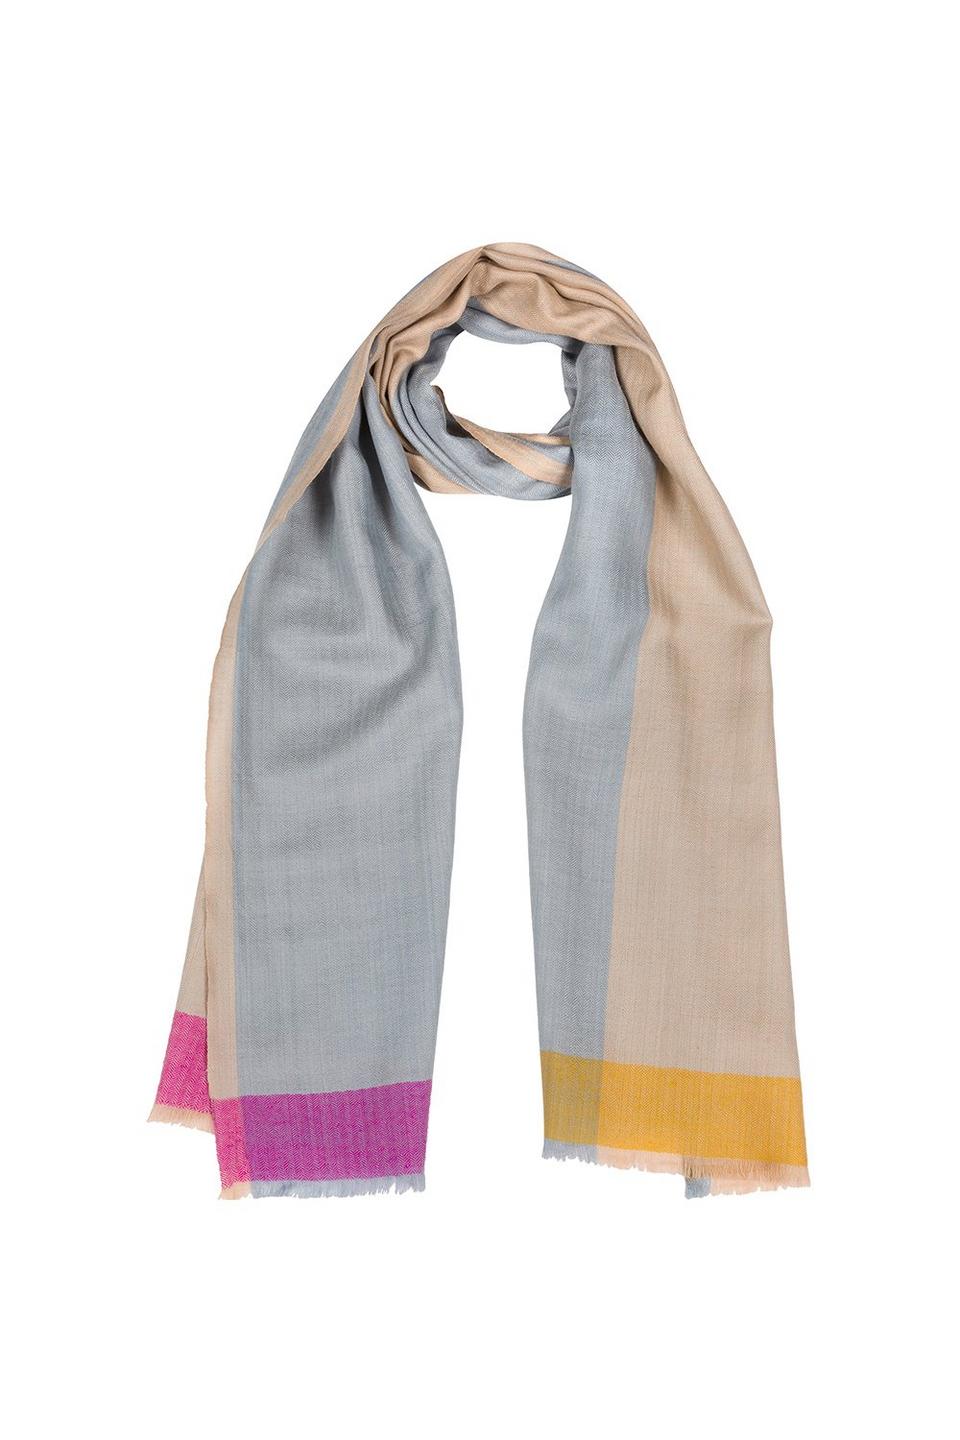 Gloves & Scarves | 'Hue' Cashmere & Merino Wool Scarf | Pure Luxuries ...